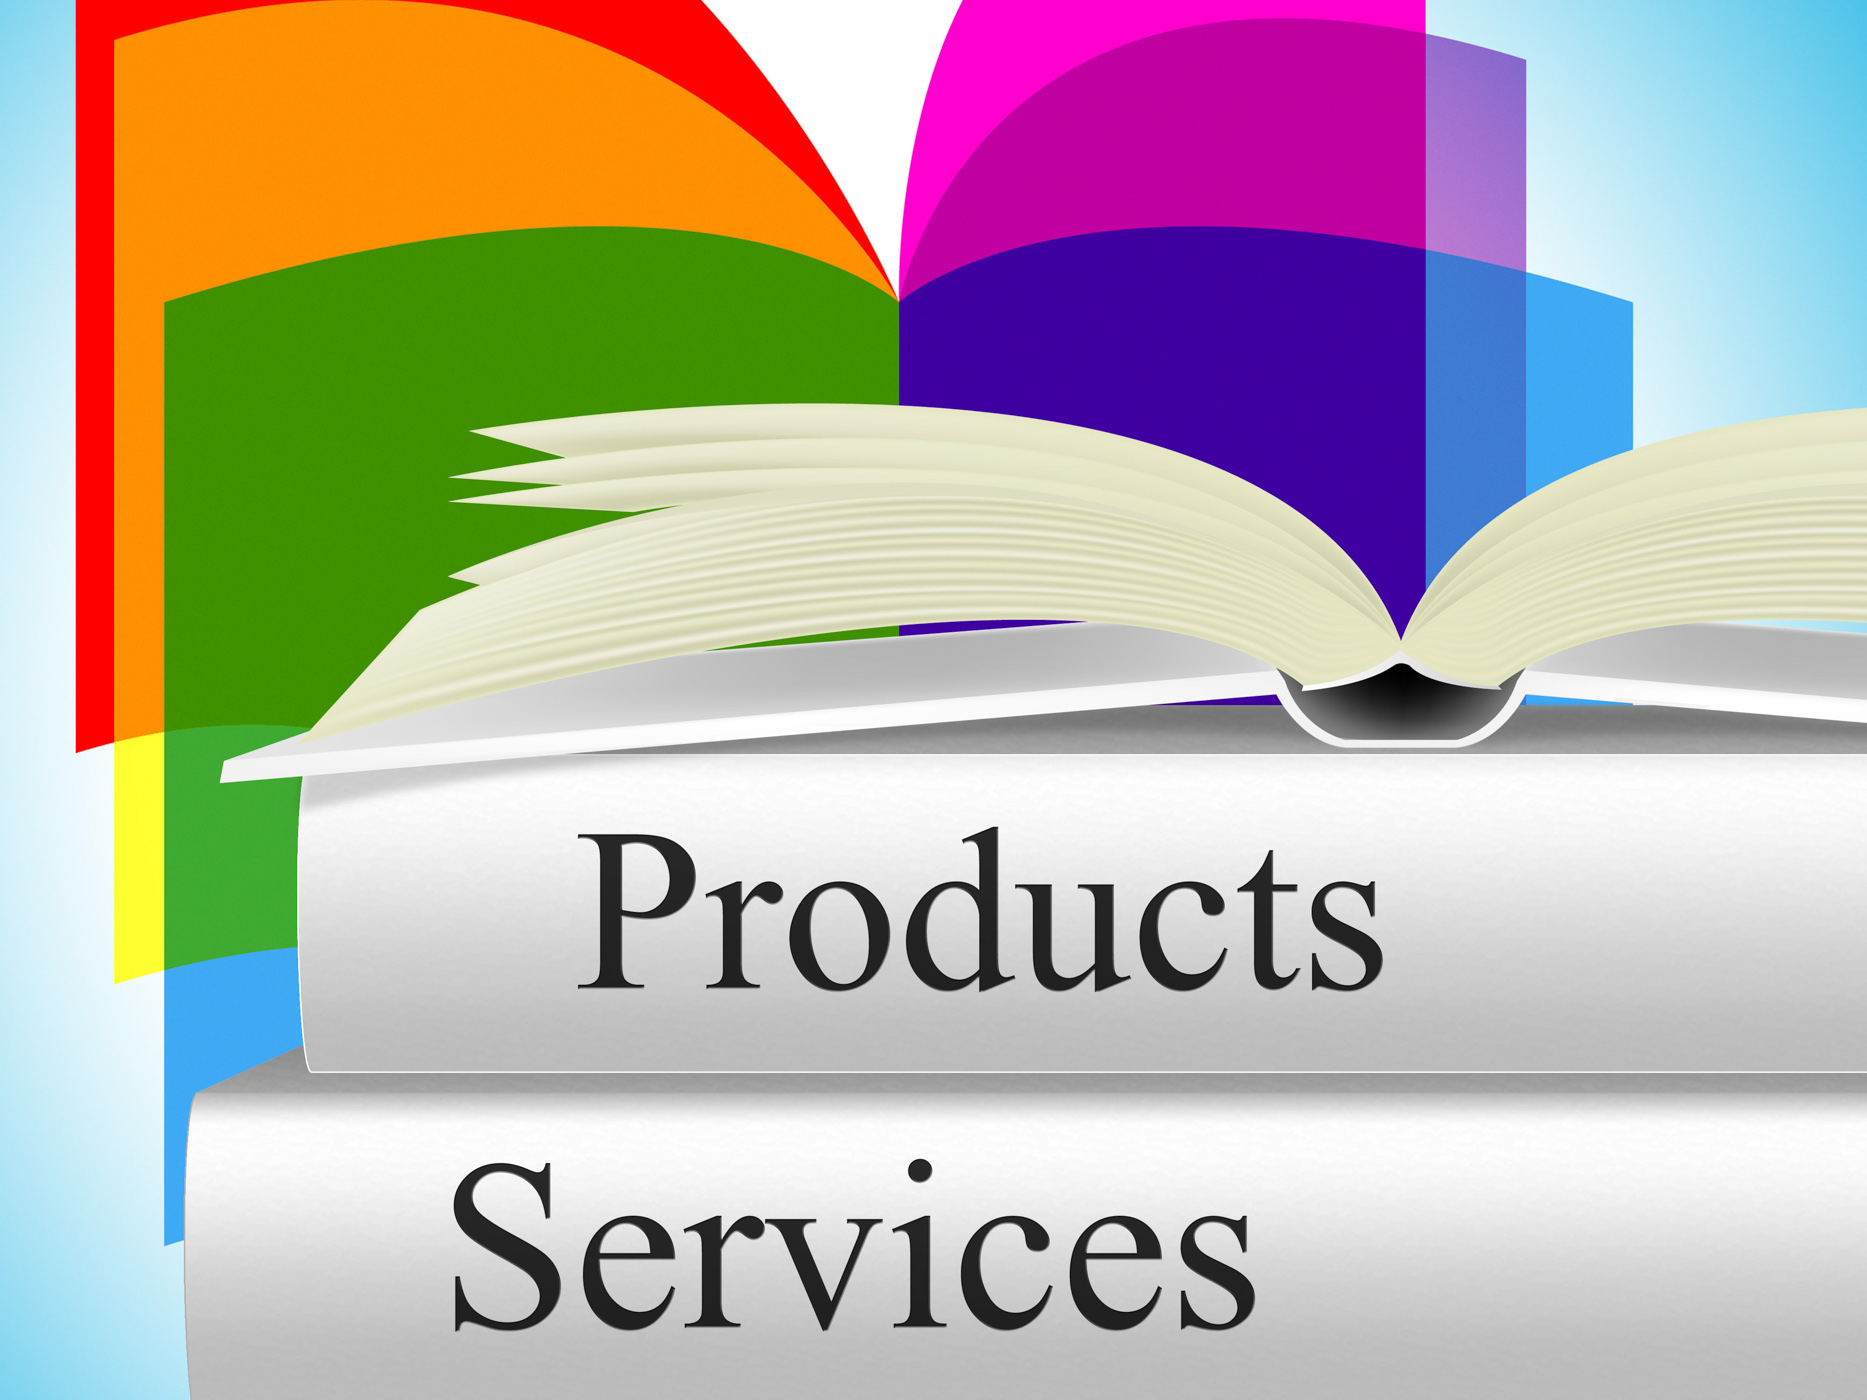 Services books represents fiction products and store photo